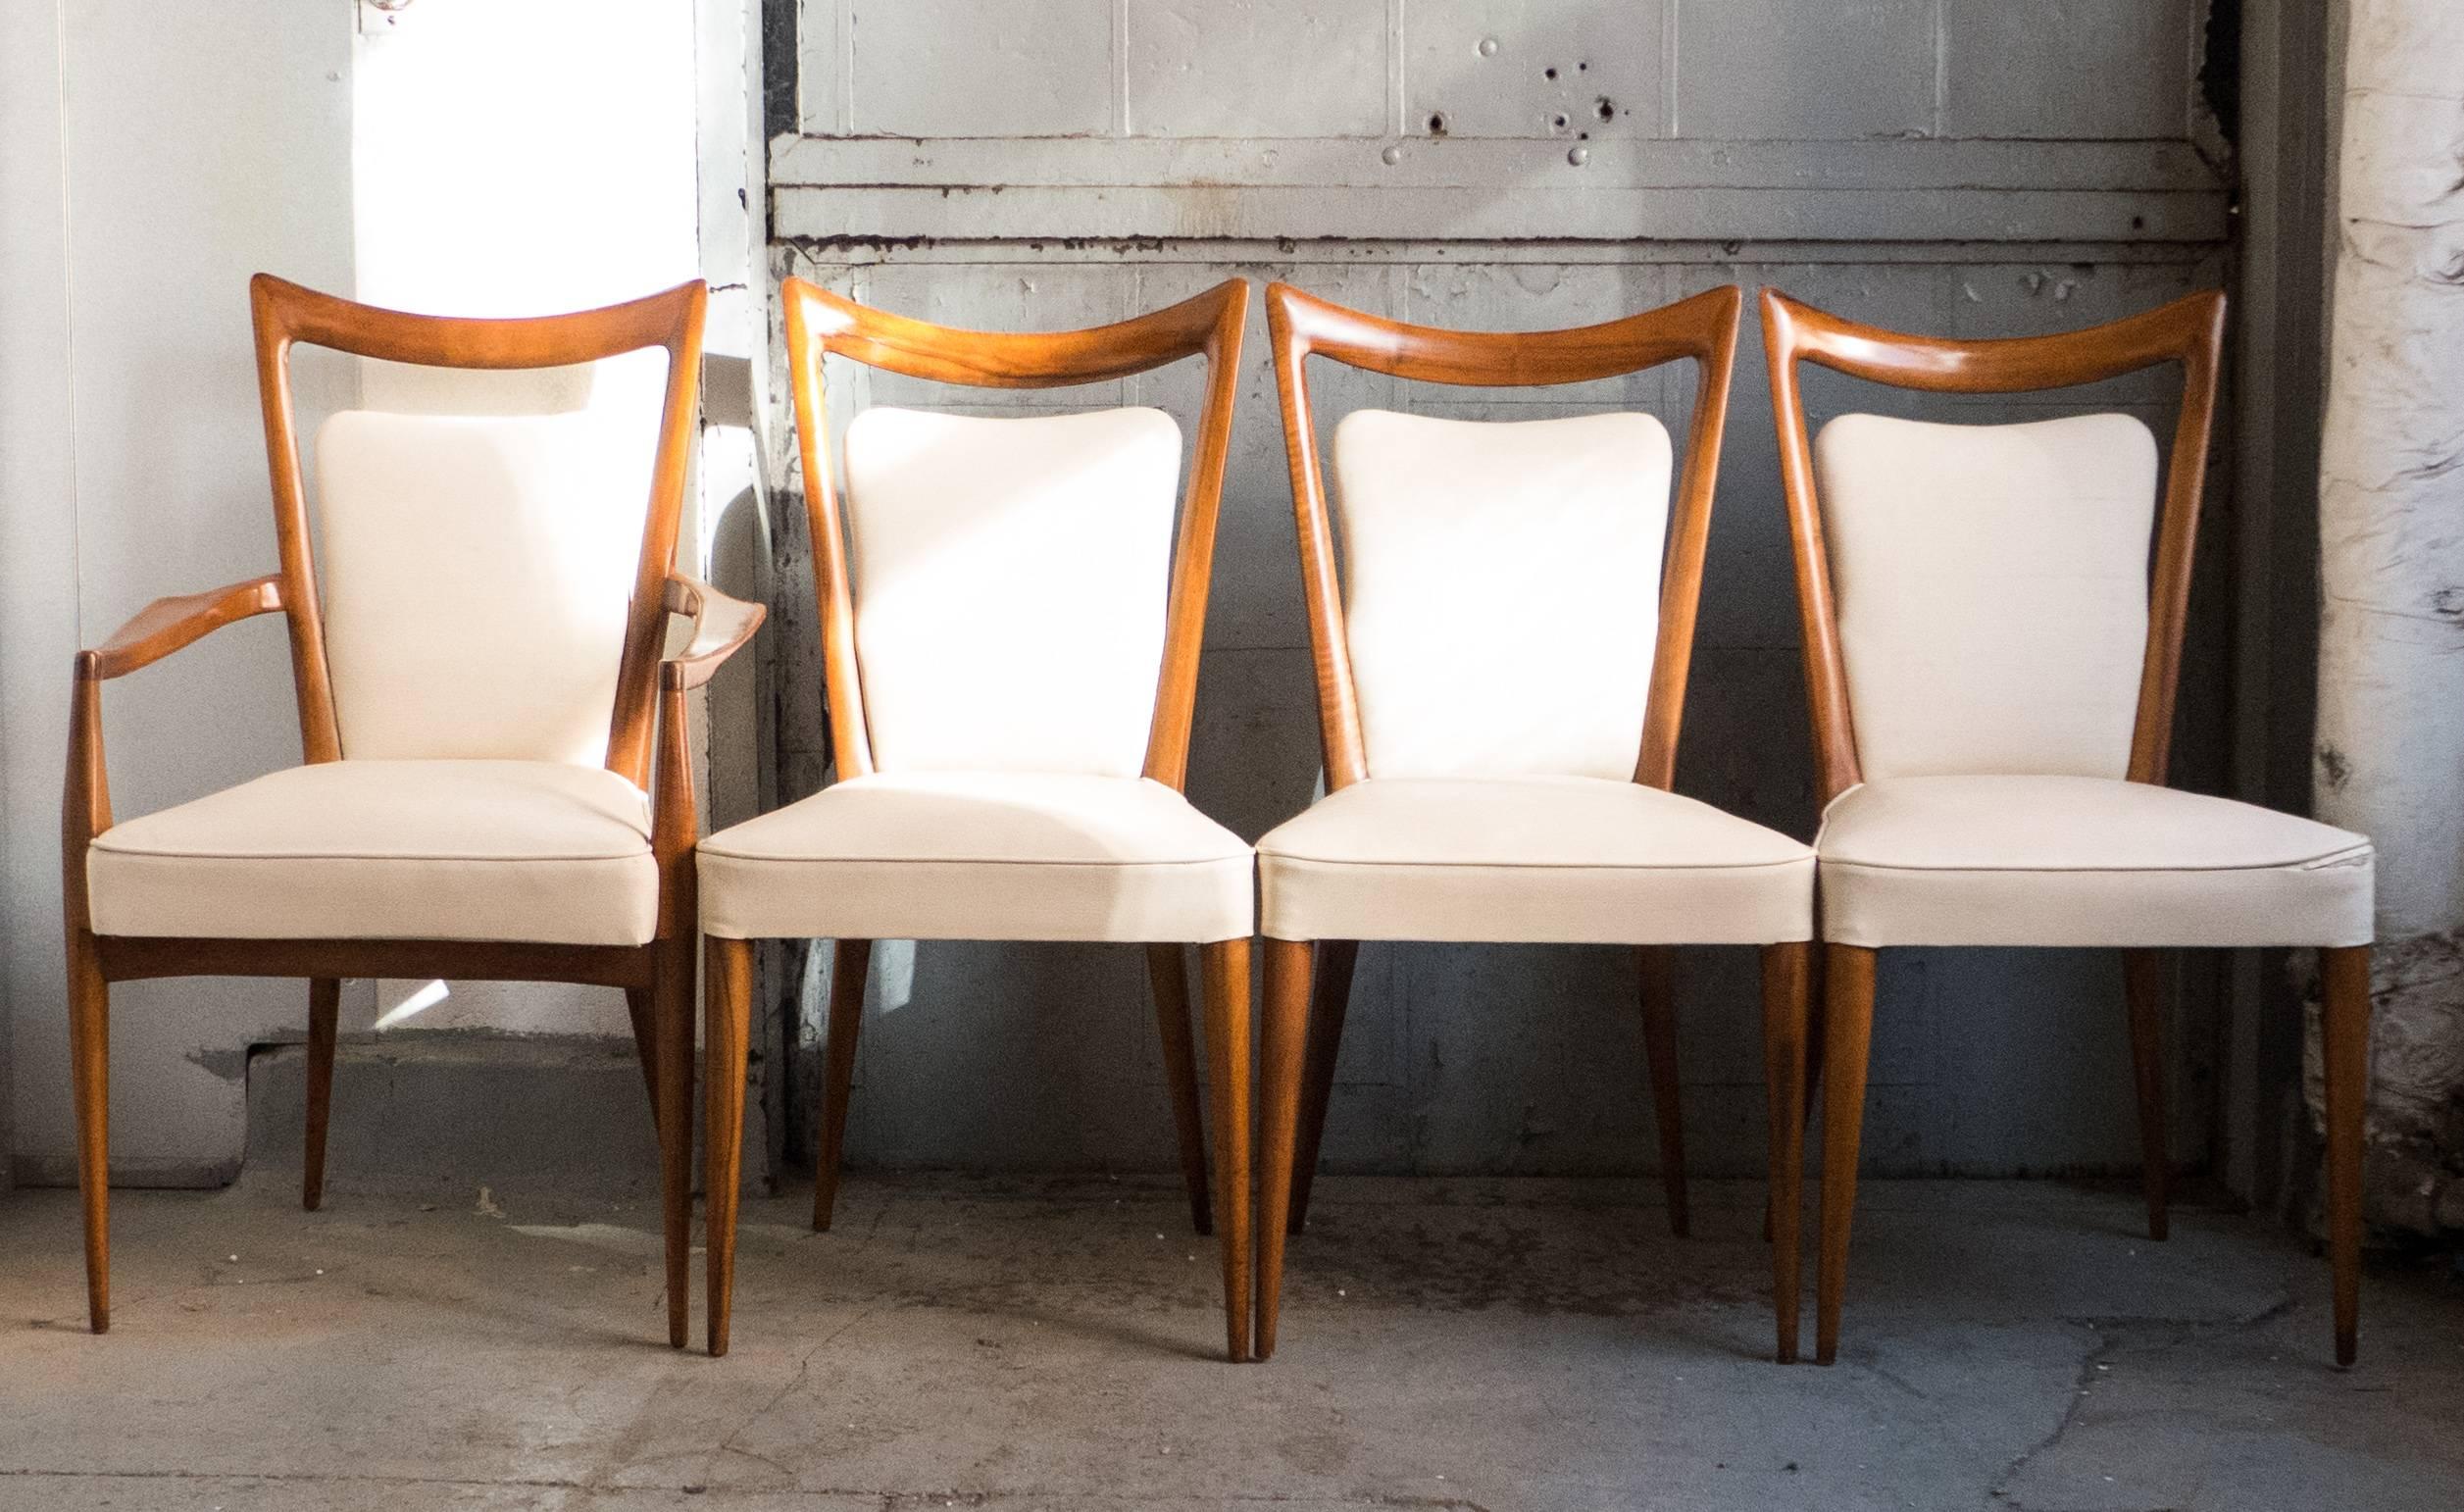 Set of eight sculptural chairs in walnut--two armchairs and six side chairs--by the Milanese architect Melchiorre Bega. Imported to New York by Erno Fabry, circa 1950s. In fine estate condition; the wood has been cleaned and polished, the joints are